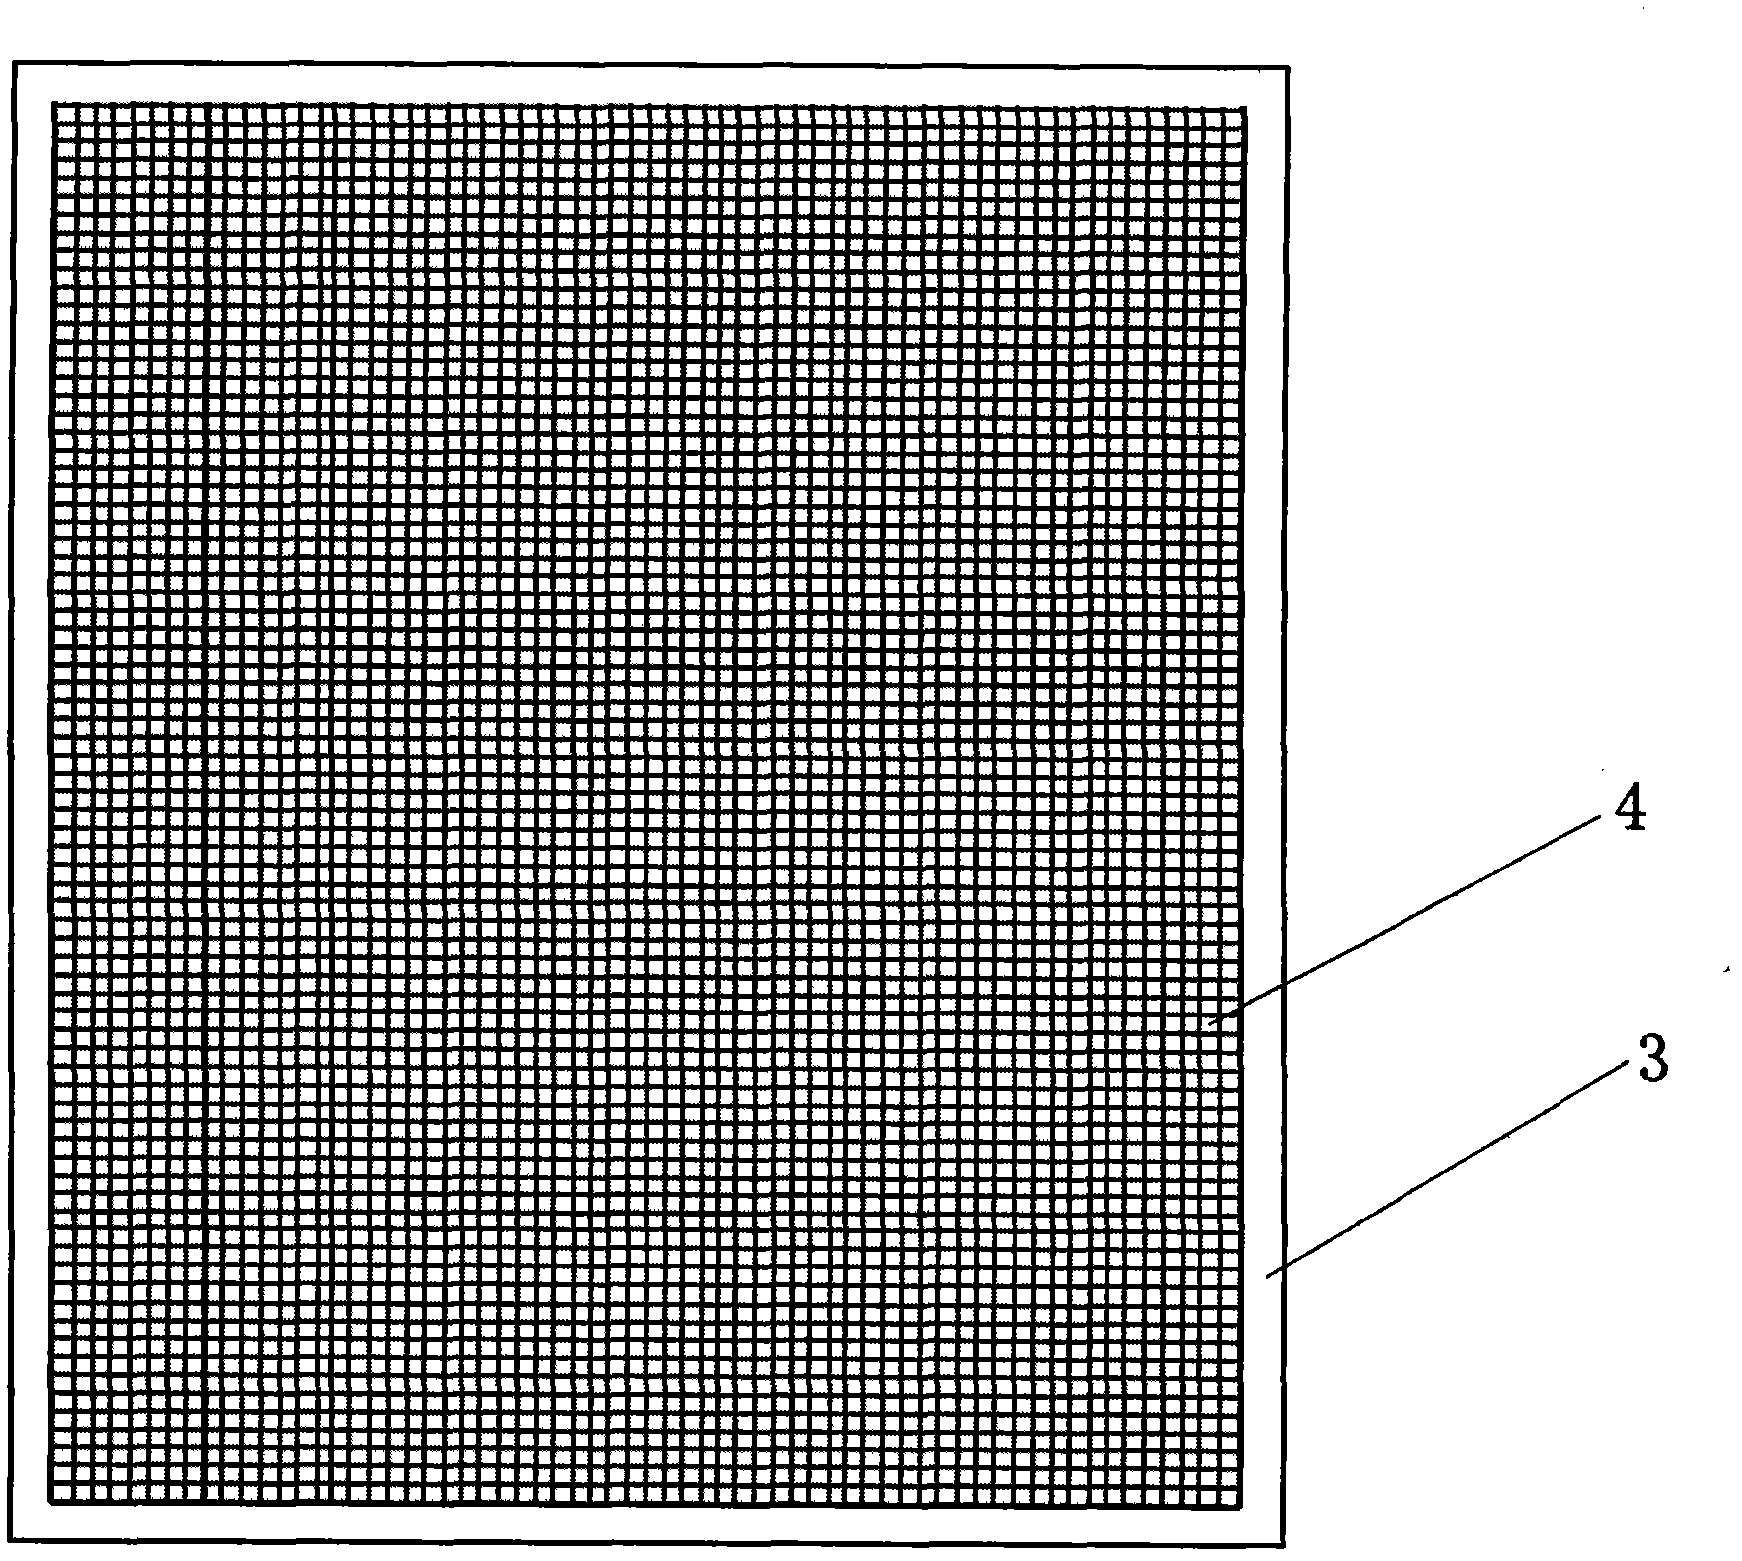 Seeding sieve for improving yield of gentiana rigescen and seeding method